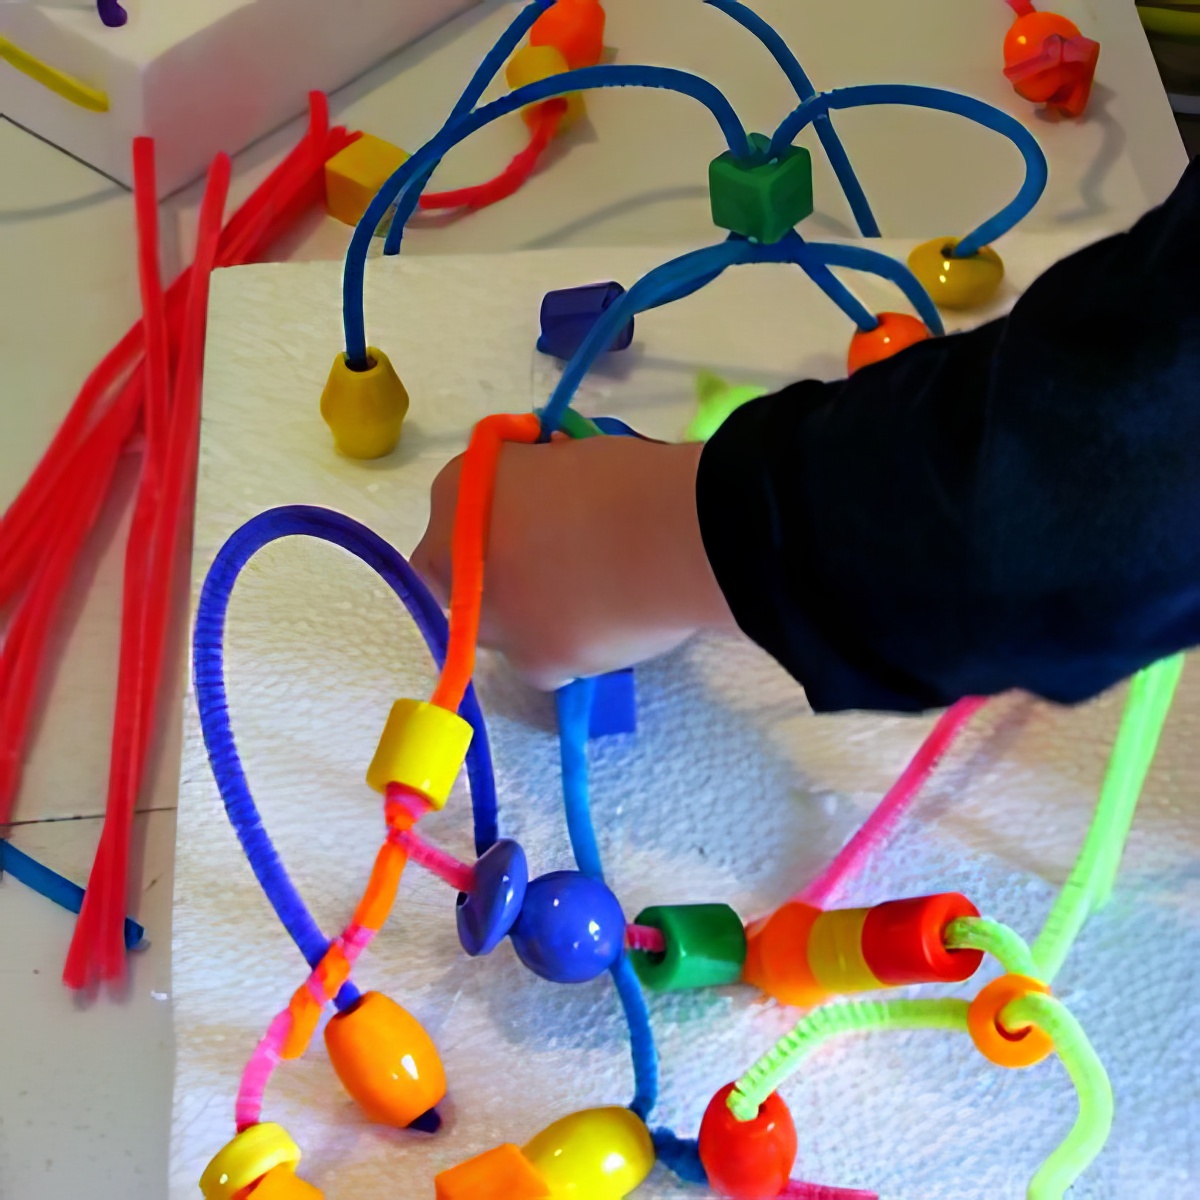 Make your own pipe cleaner bead maze easy diy fun activity for kids with pipe cleaners